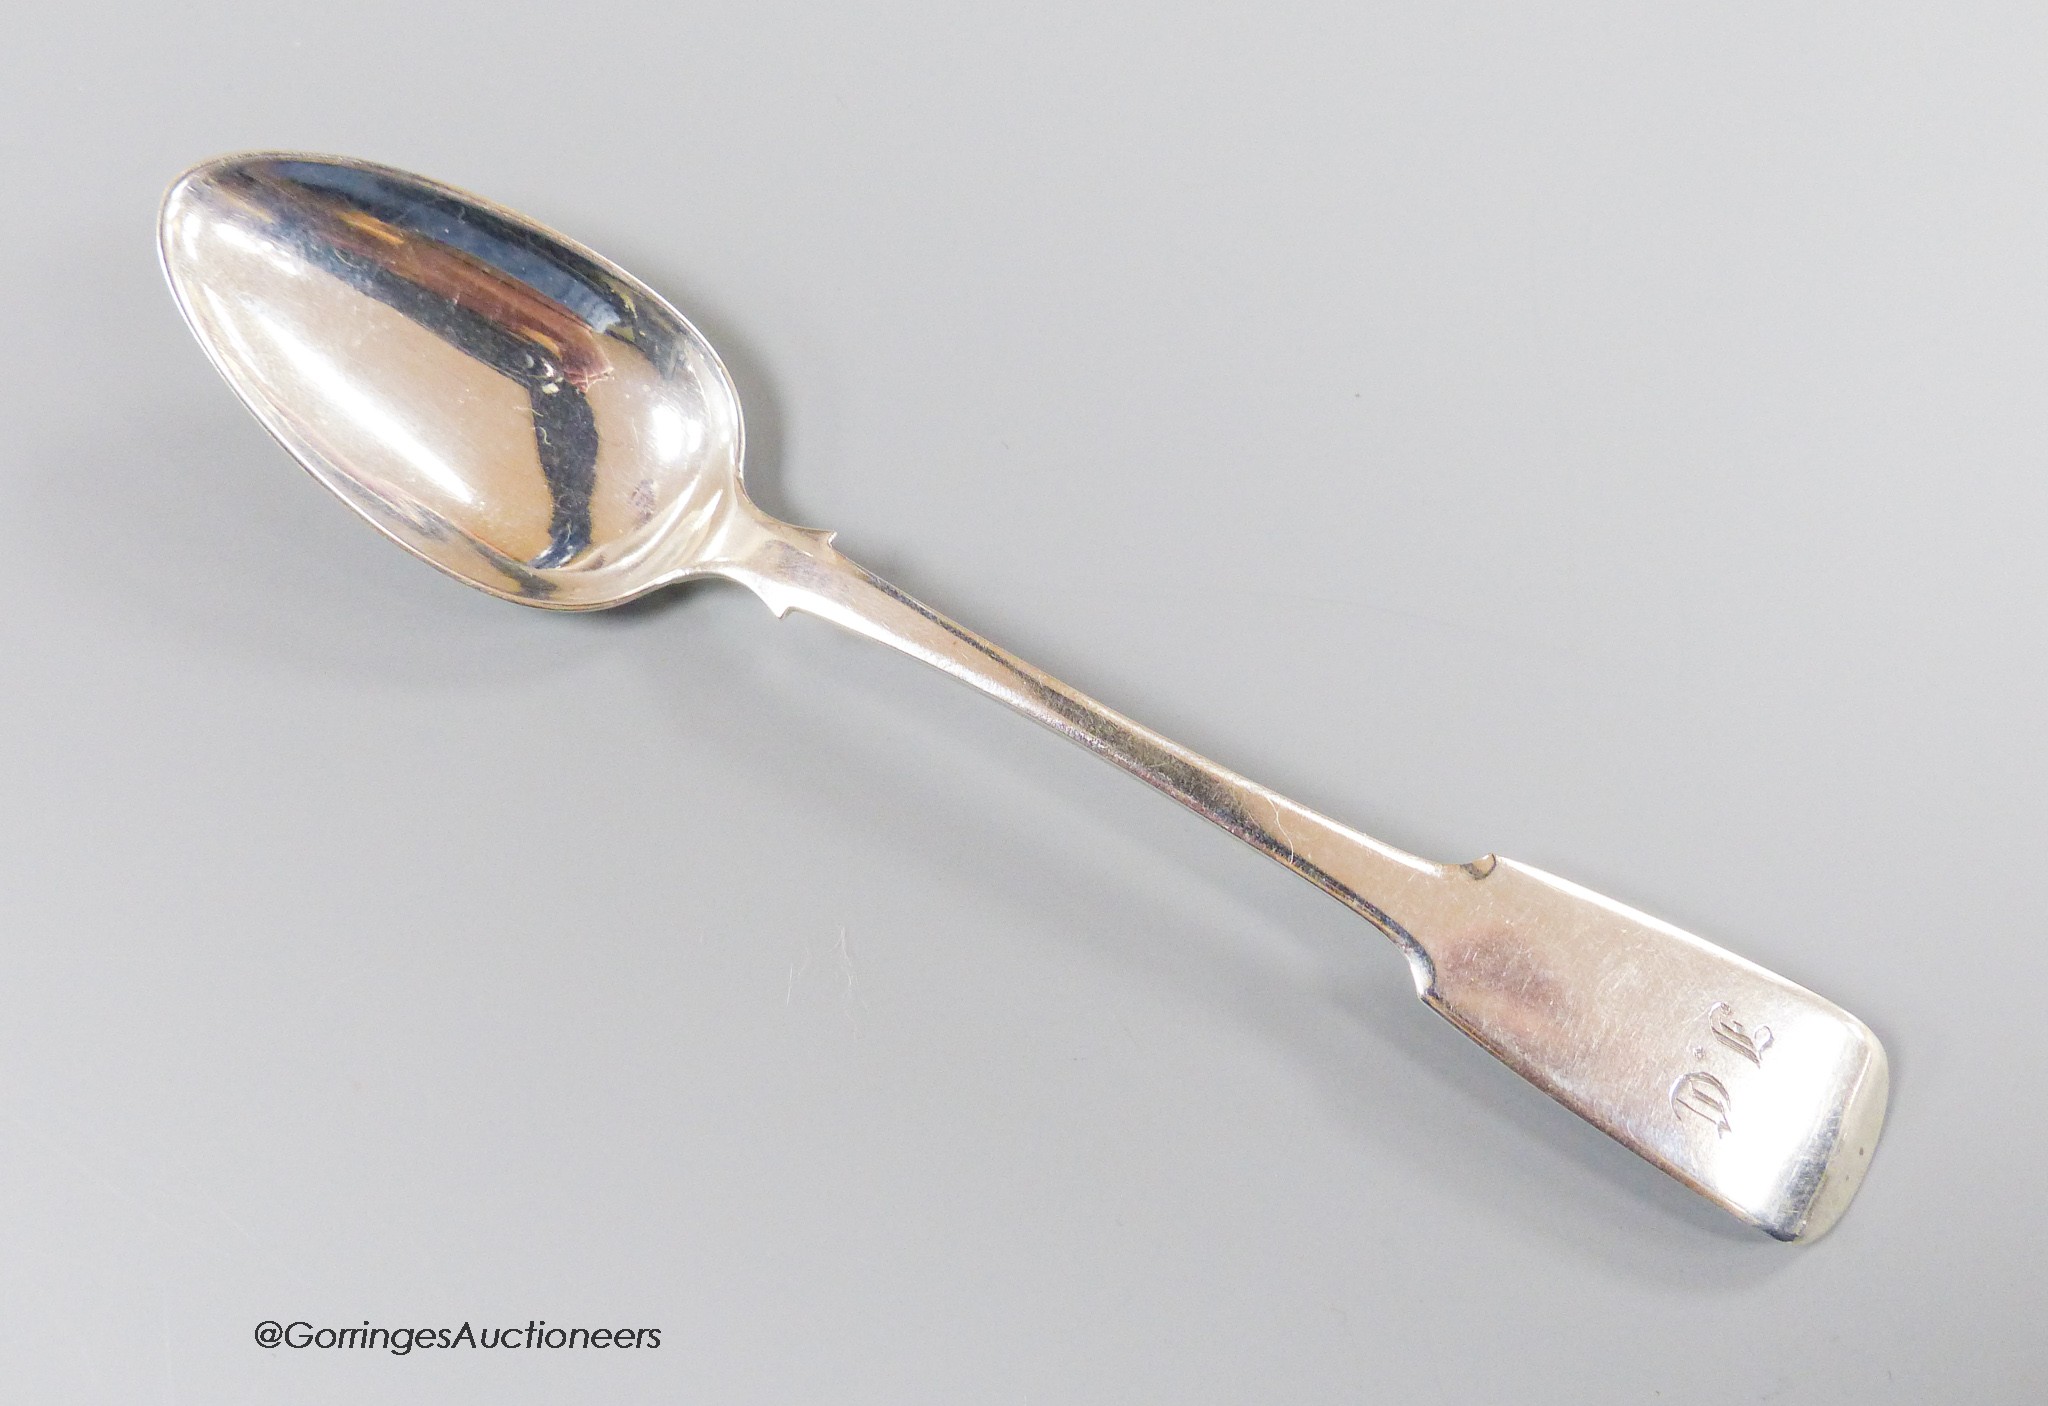 A 19th century Scottish provincial silver fiddle pattern teaspoons, possibly by Alexander Glenney, Stonehaven? c.1840, 14.5cm, 22n grams.